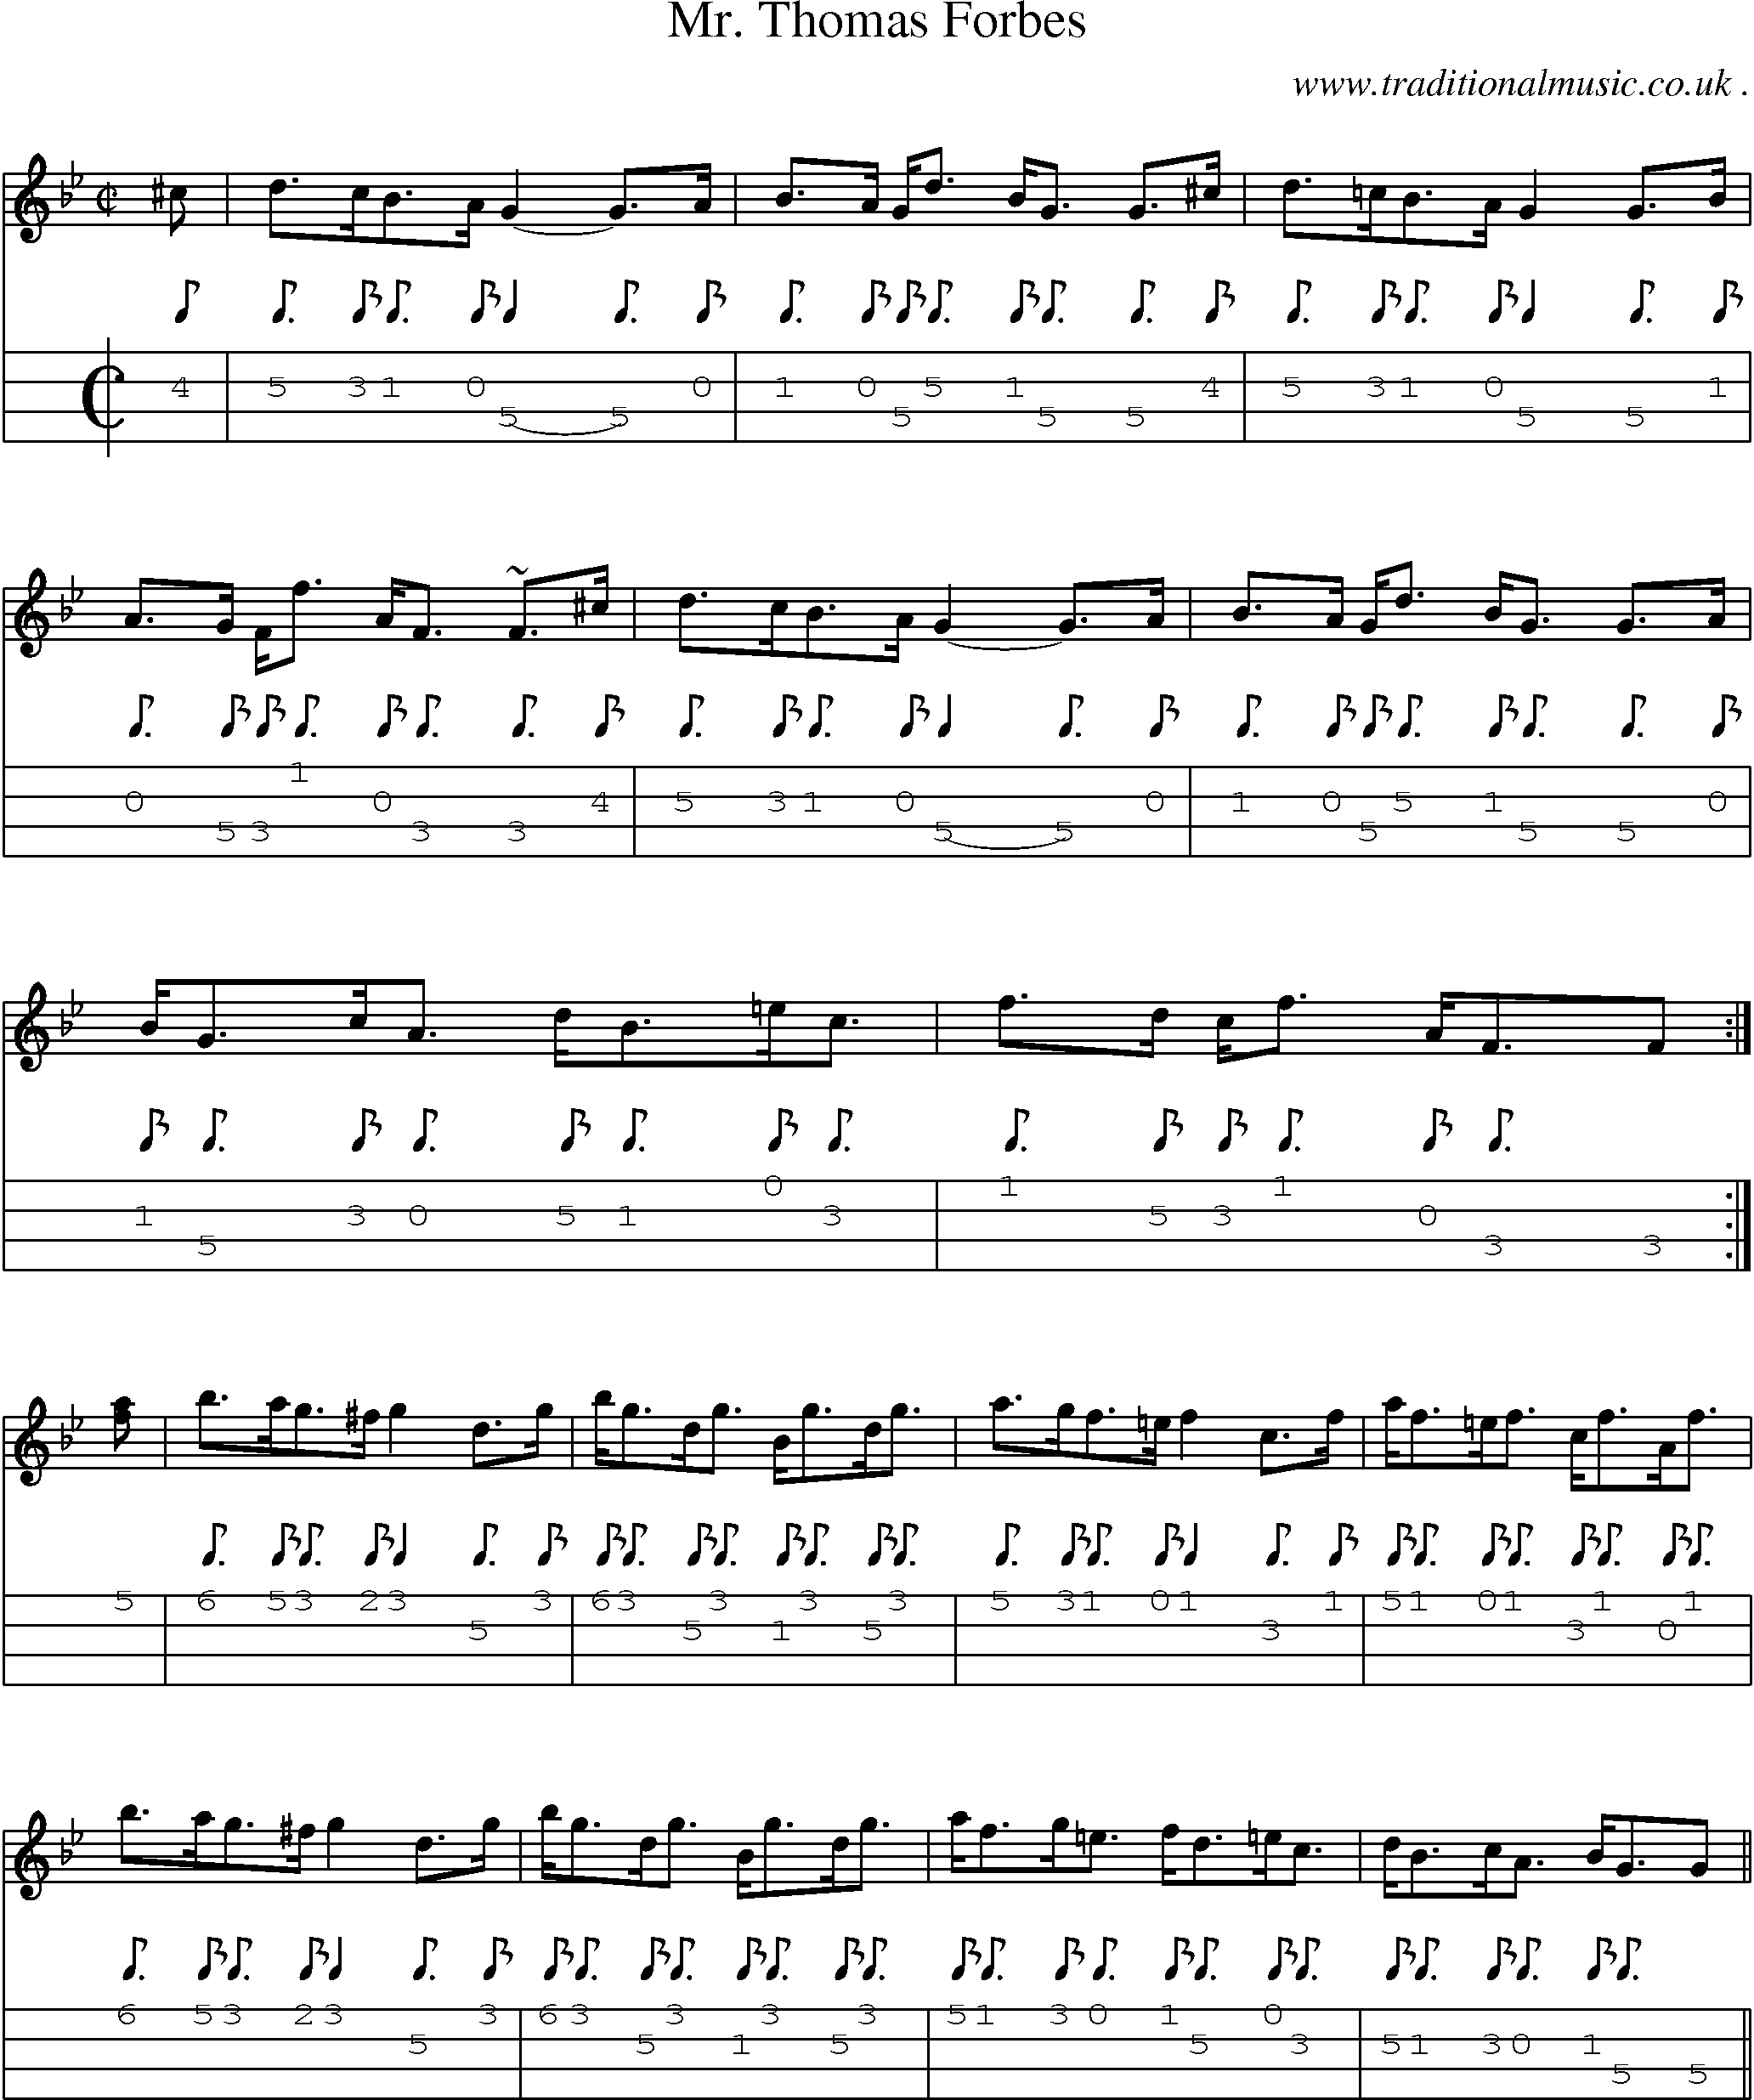 Sheet-music  score, Chords and Mandolin Tabs for Mr Thomas Forbes